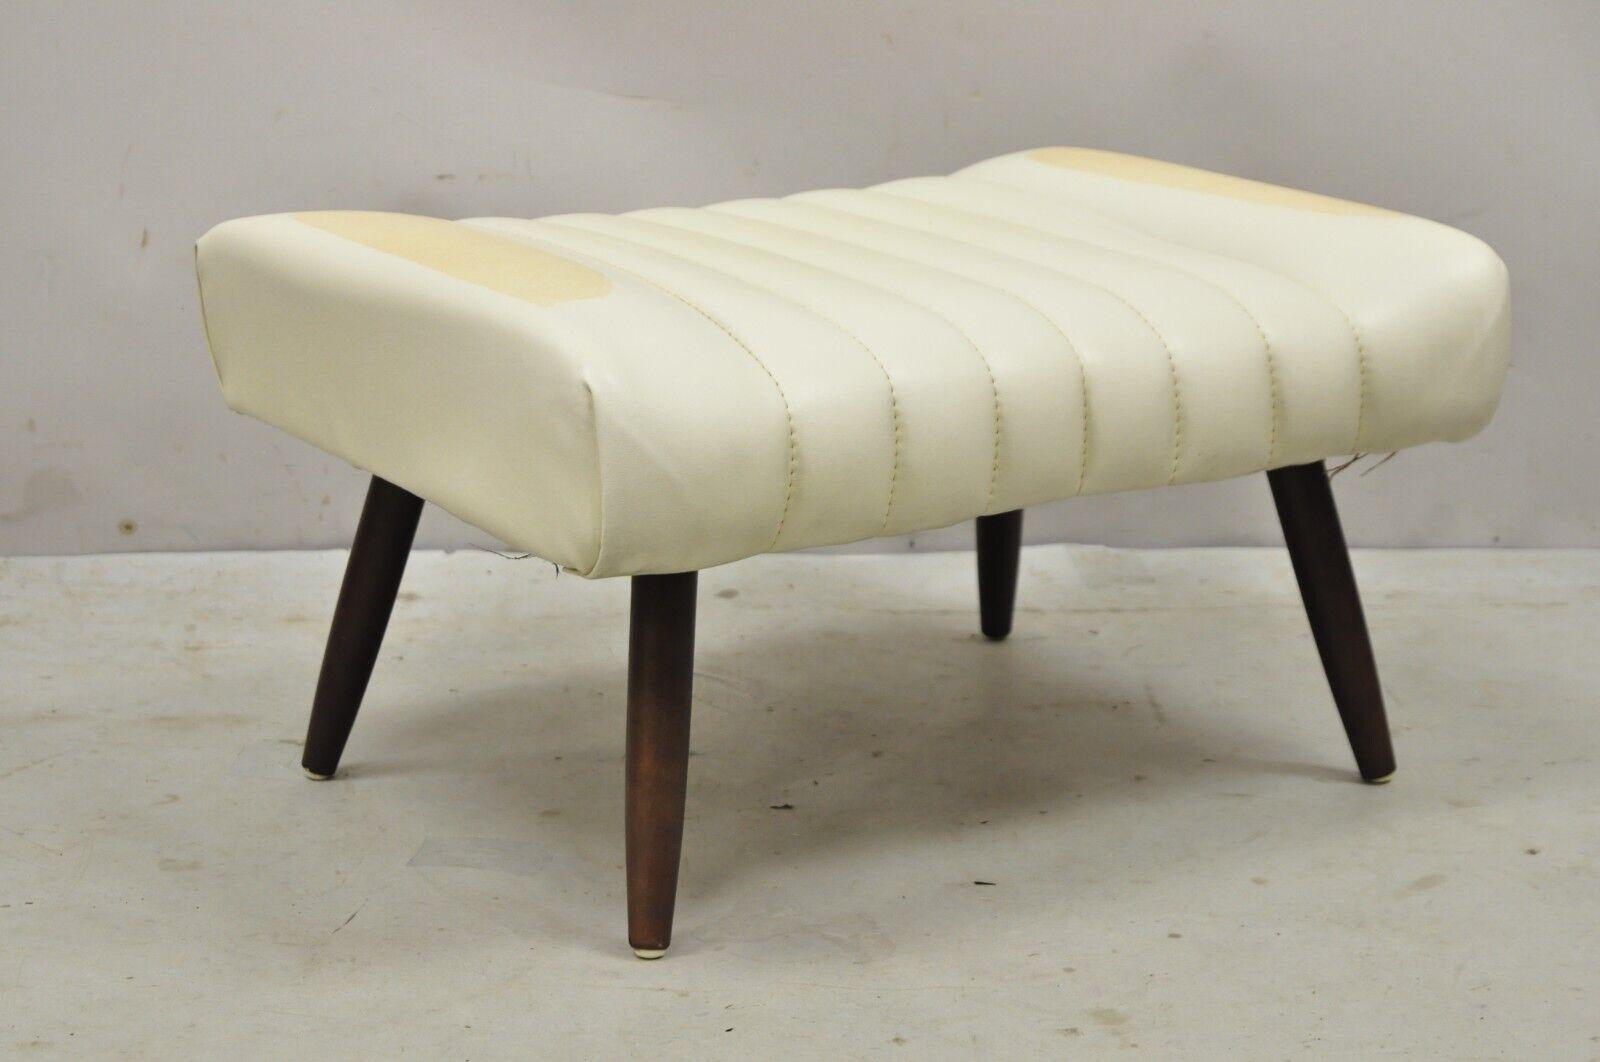 Vintage Mid-Century Modern adjustable angle ottoman footstool with wooden legs. Item features adjustable height / angle, tapered wooden legs, beige vinyl upholstery, very nice vintage item, sleek sculptural form. circa mid 20th